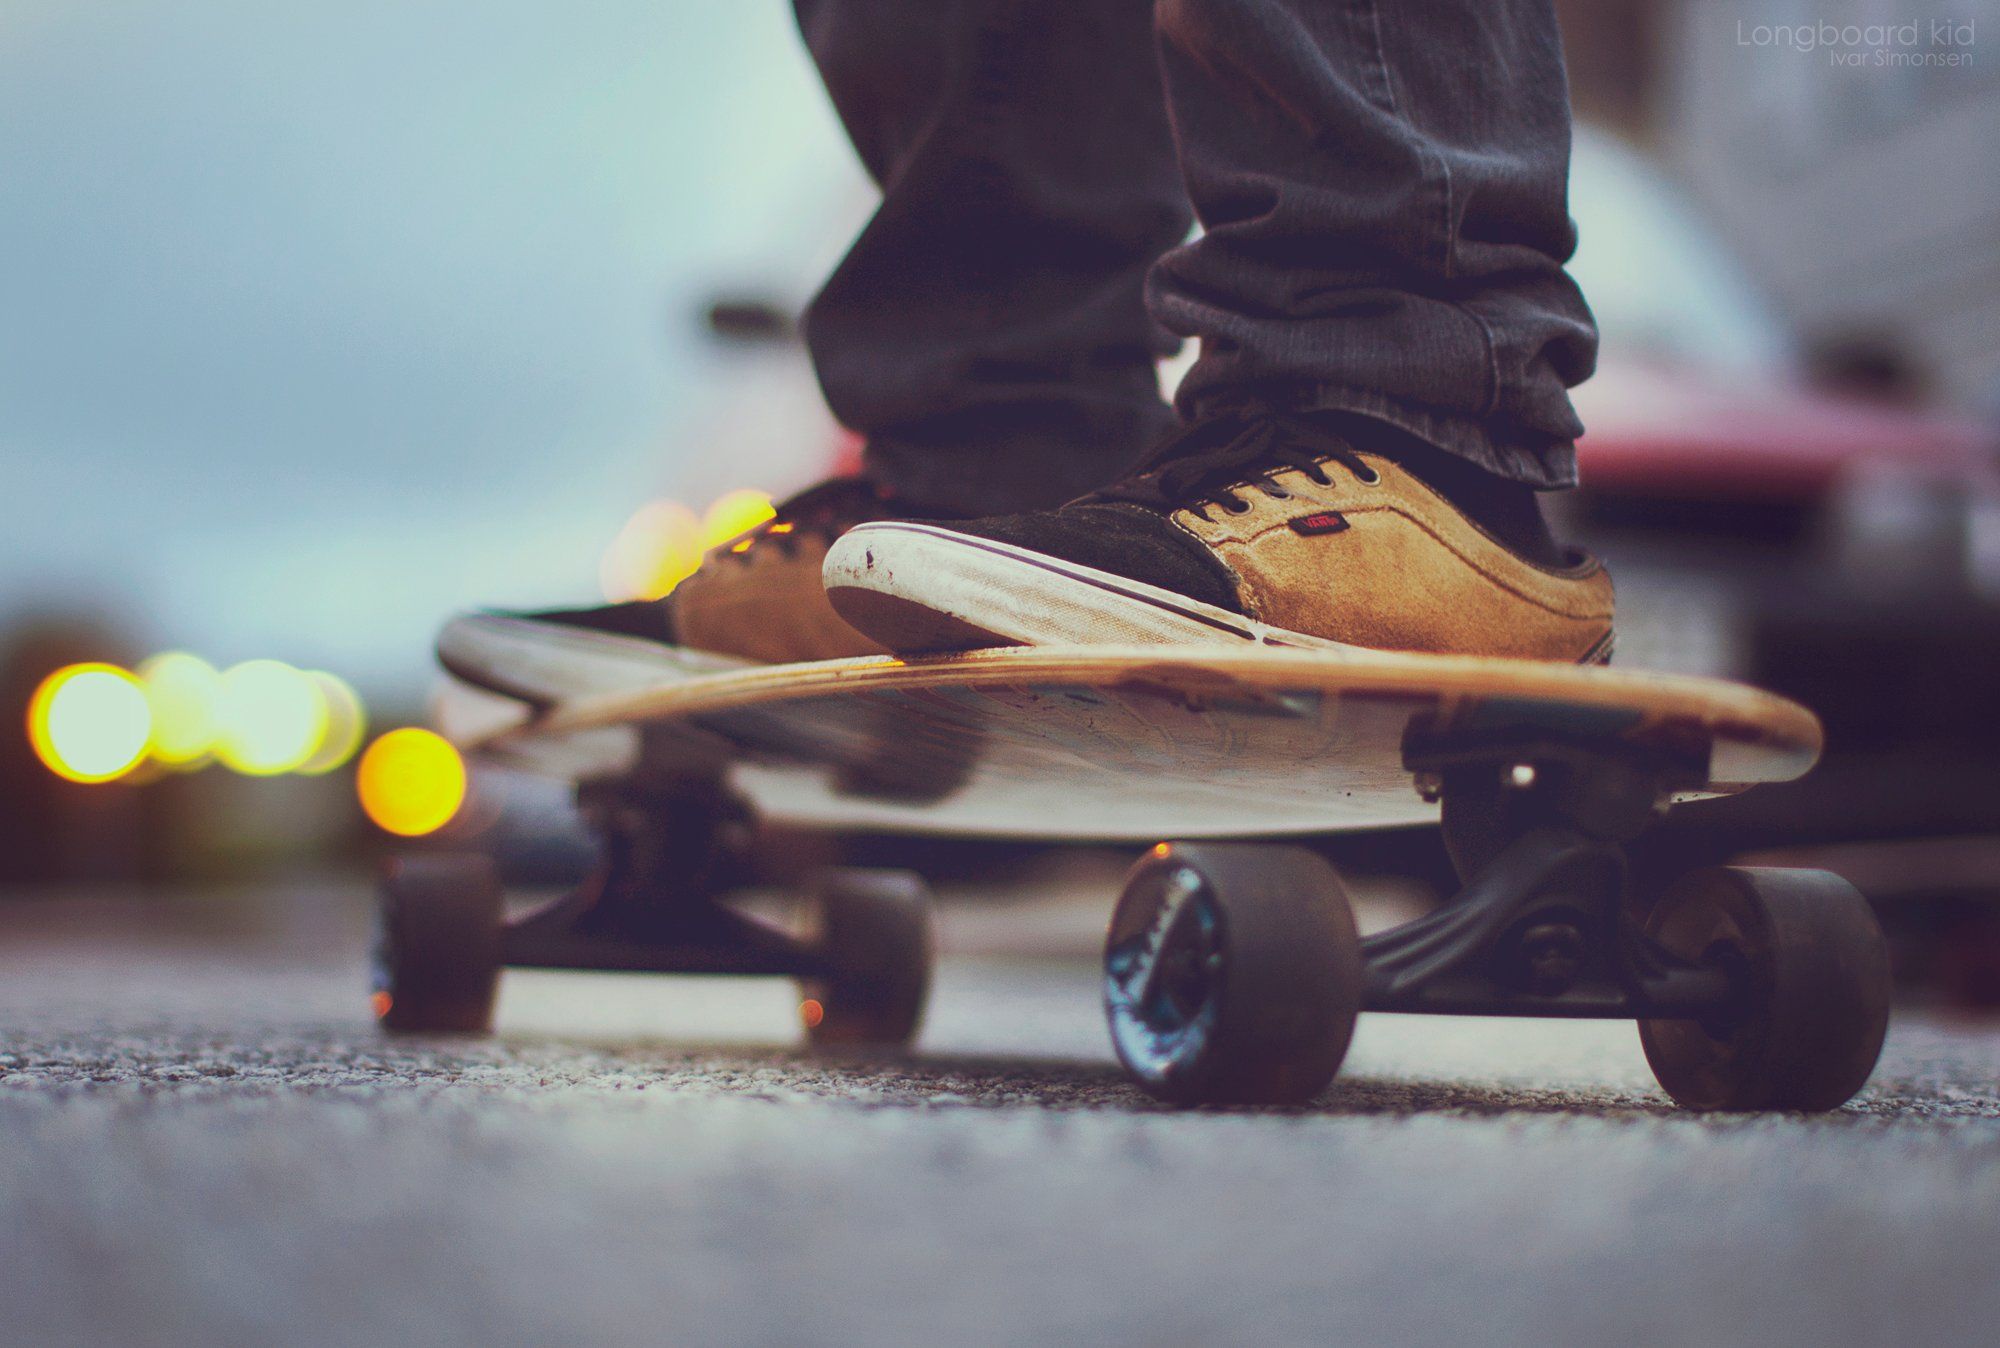 Skate Aesthetic Computer Wallpapers  Wallpaper Cave